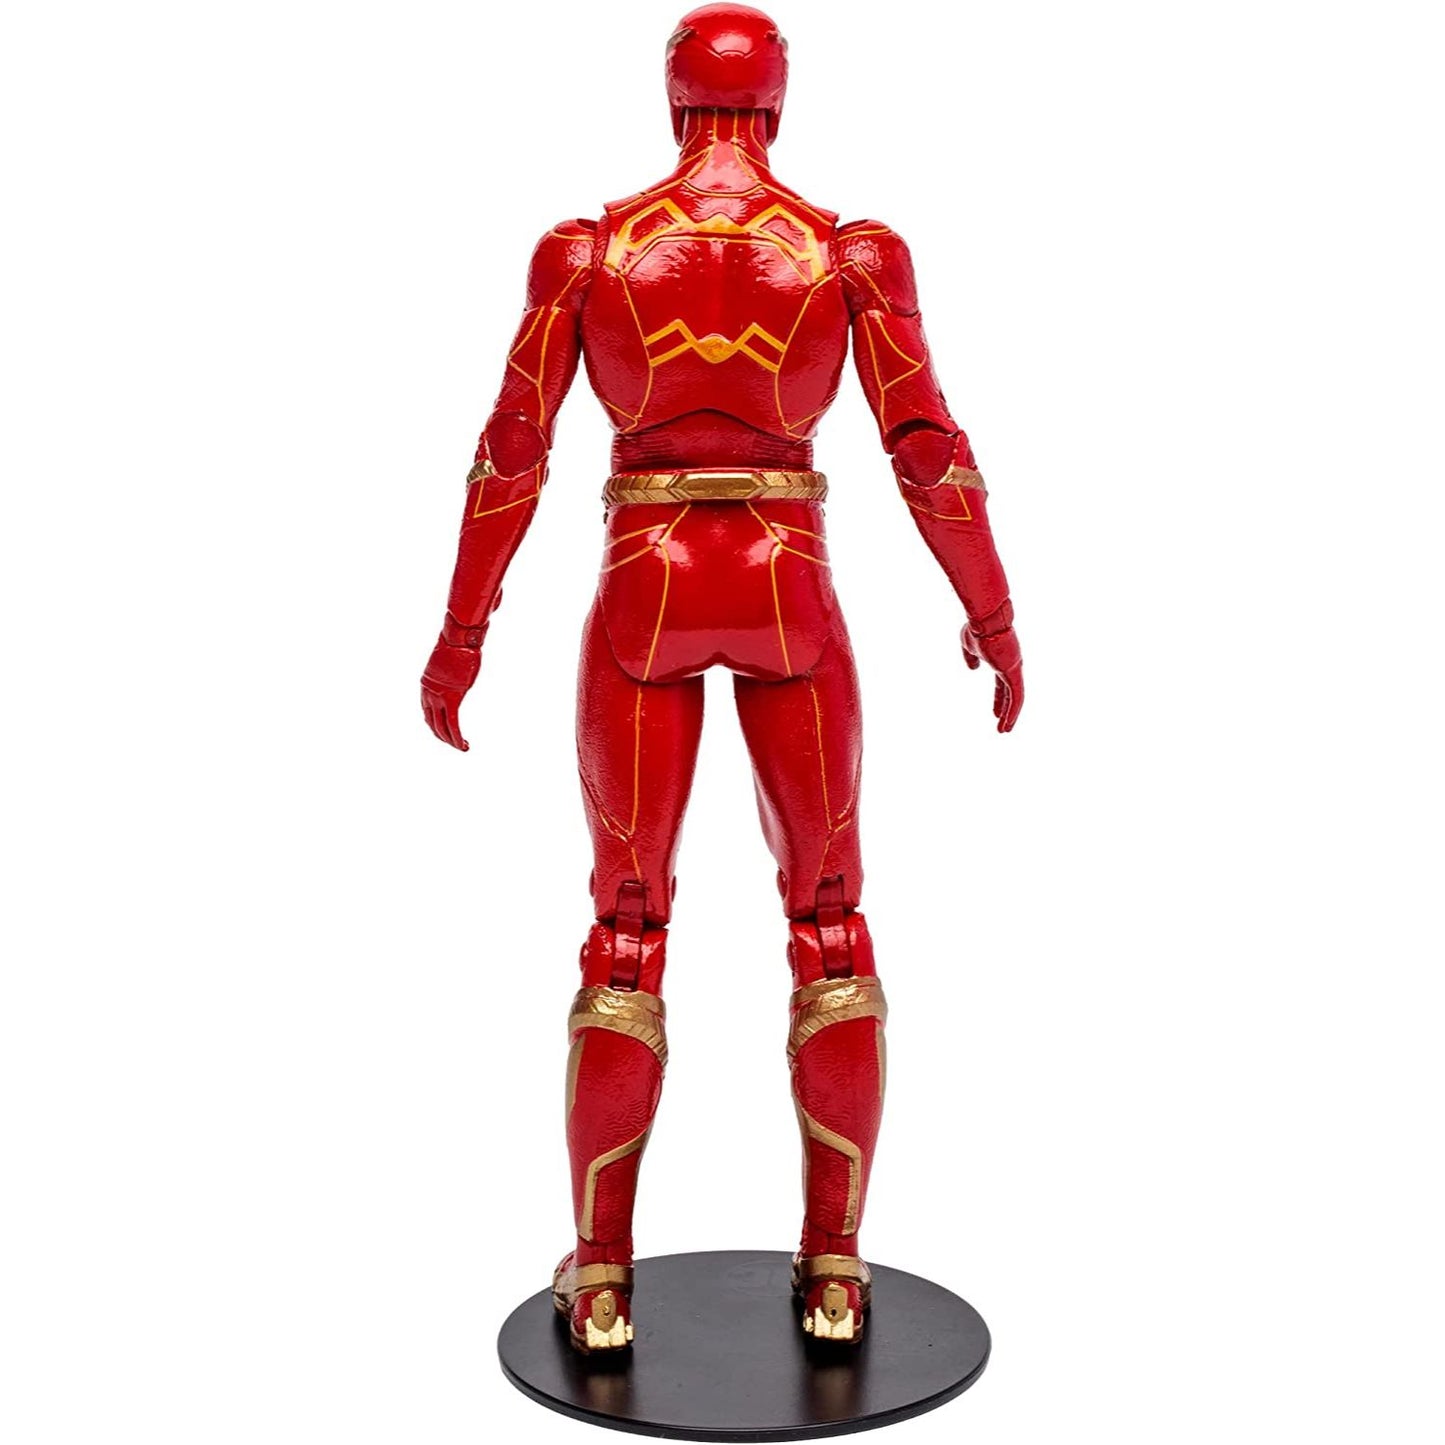 DC Multiverse - The Flash Movie - The Flash Action Figure 7INCh Toy back Pose- Heretoserveyou